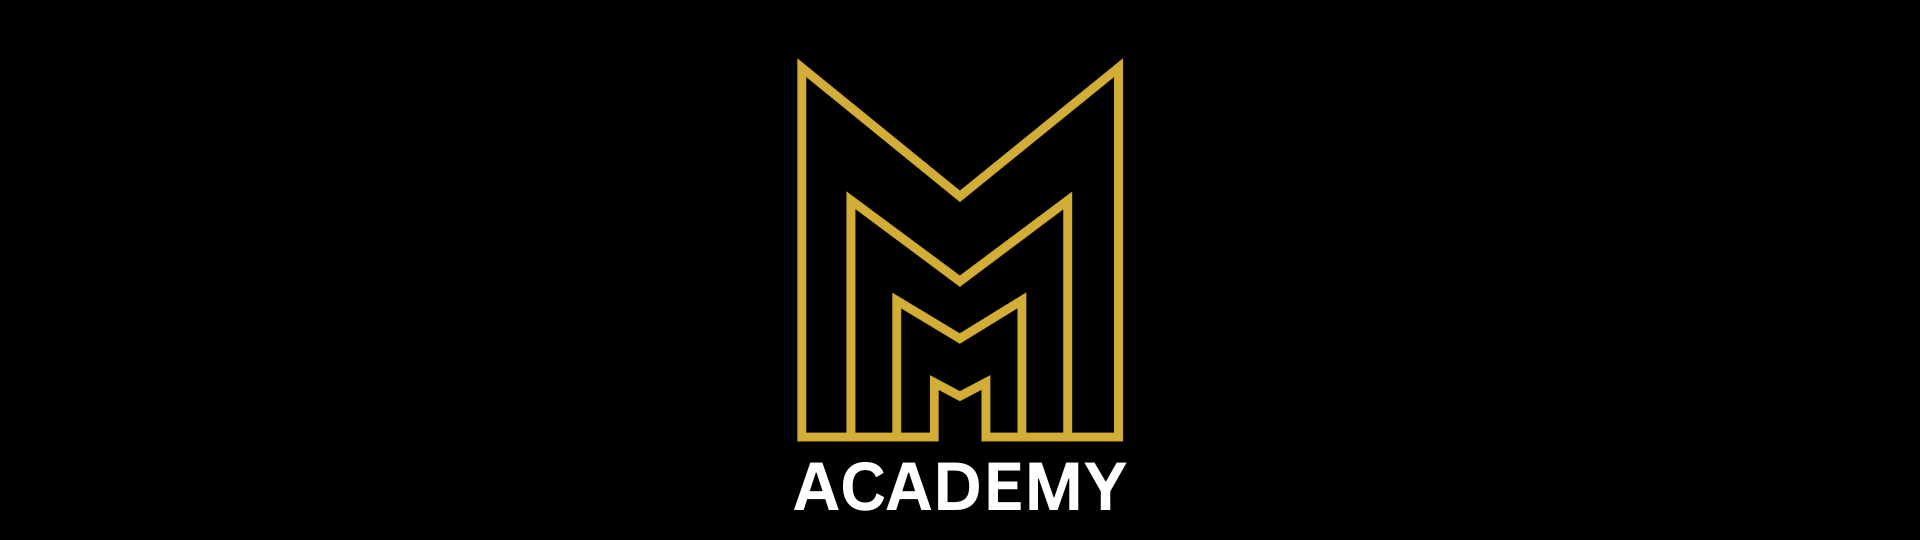 Mindset, Money, and More Academy